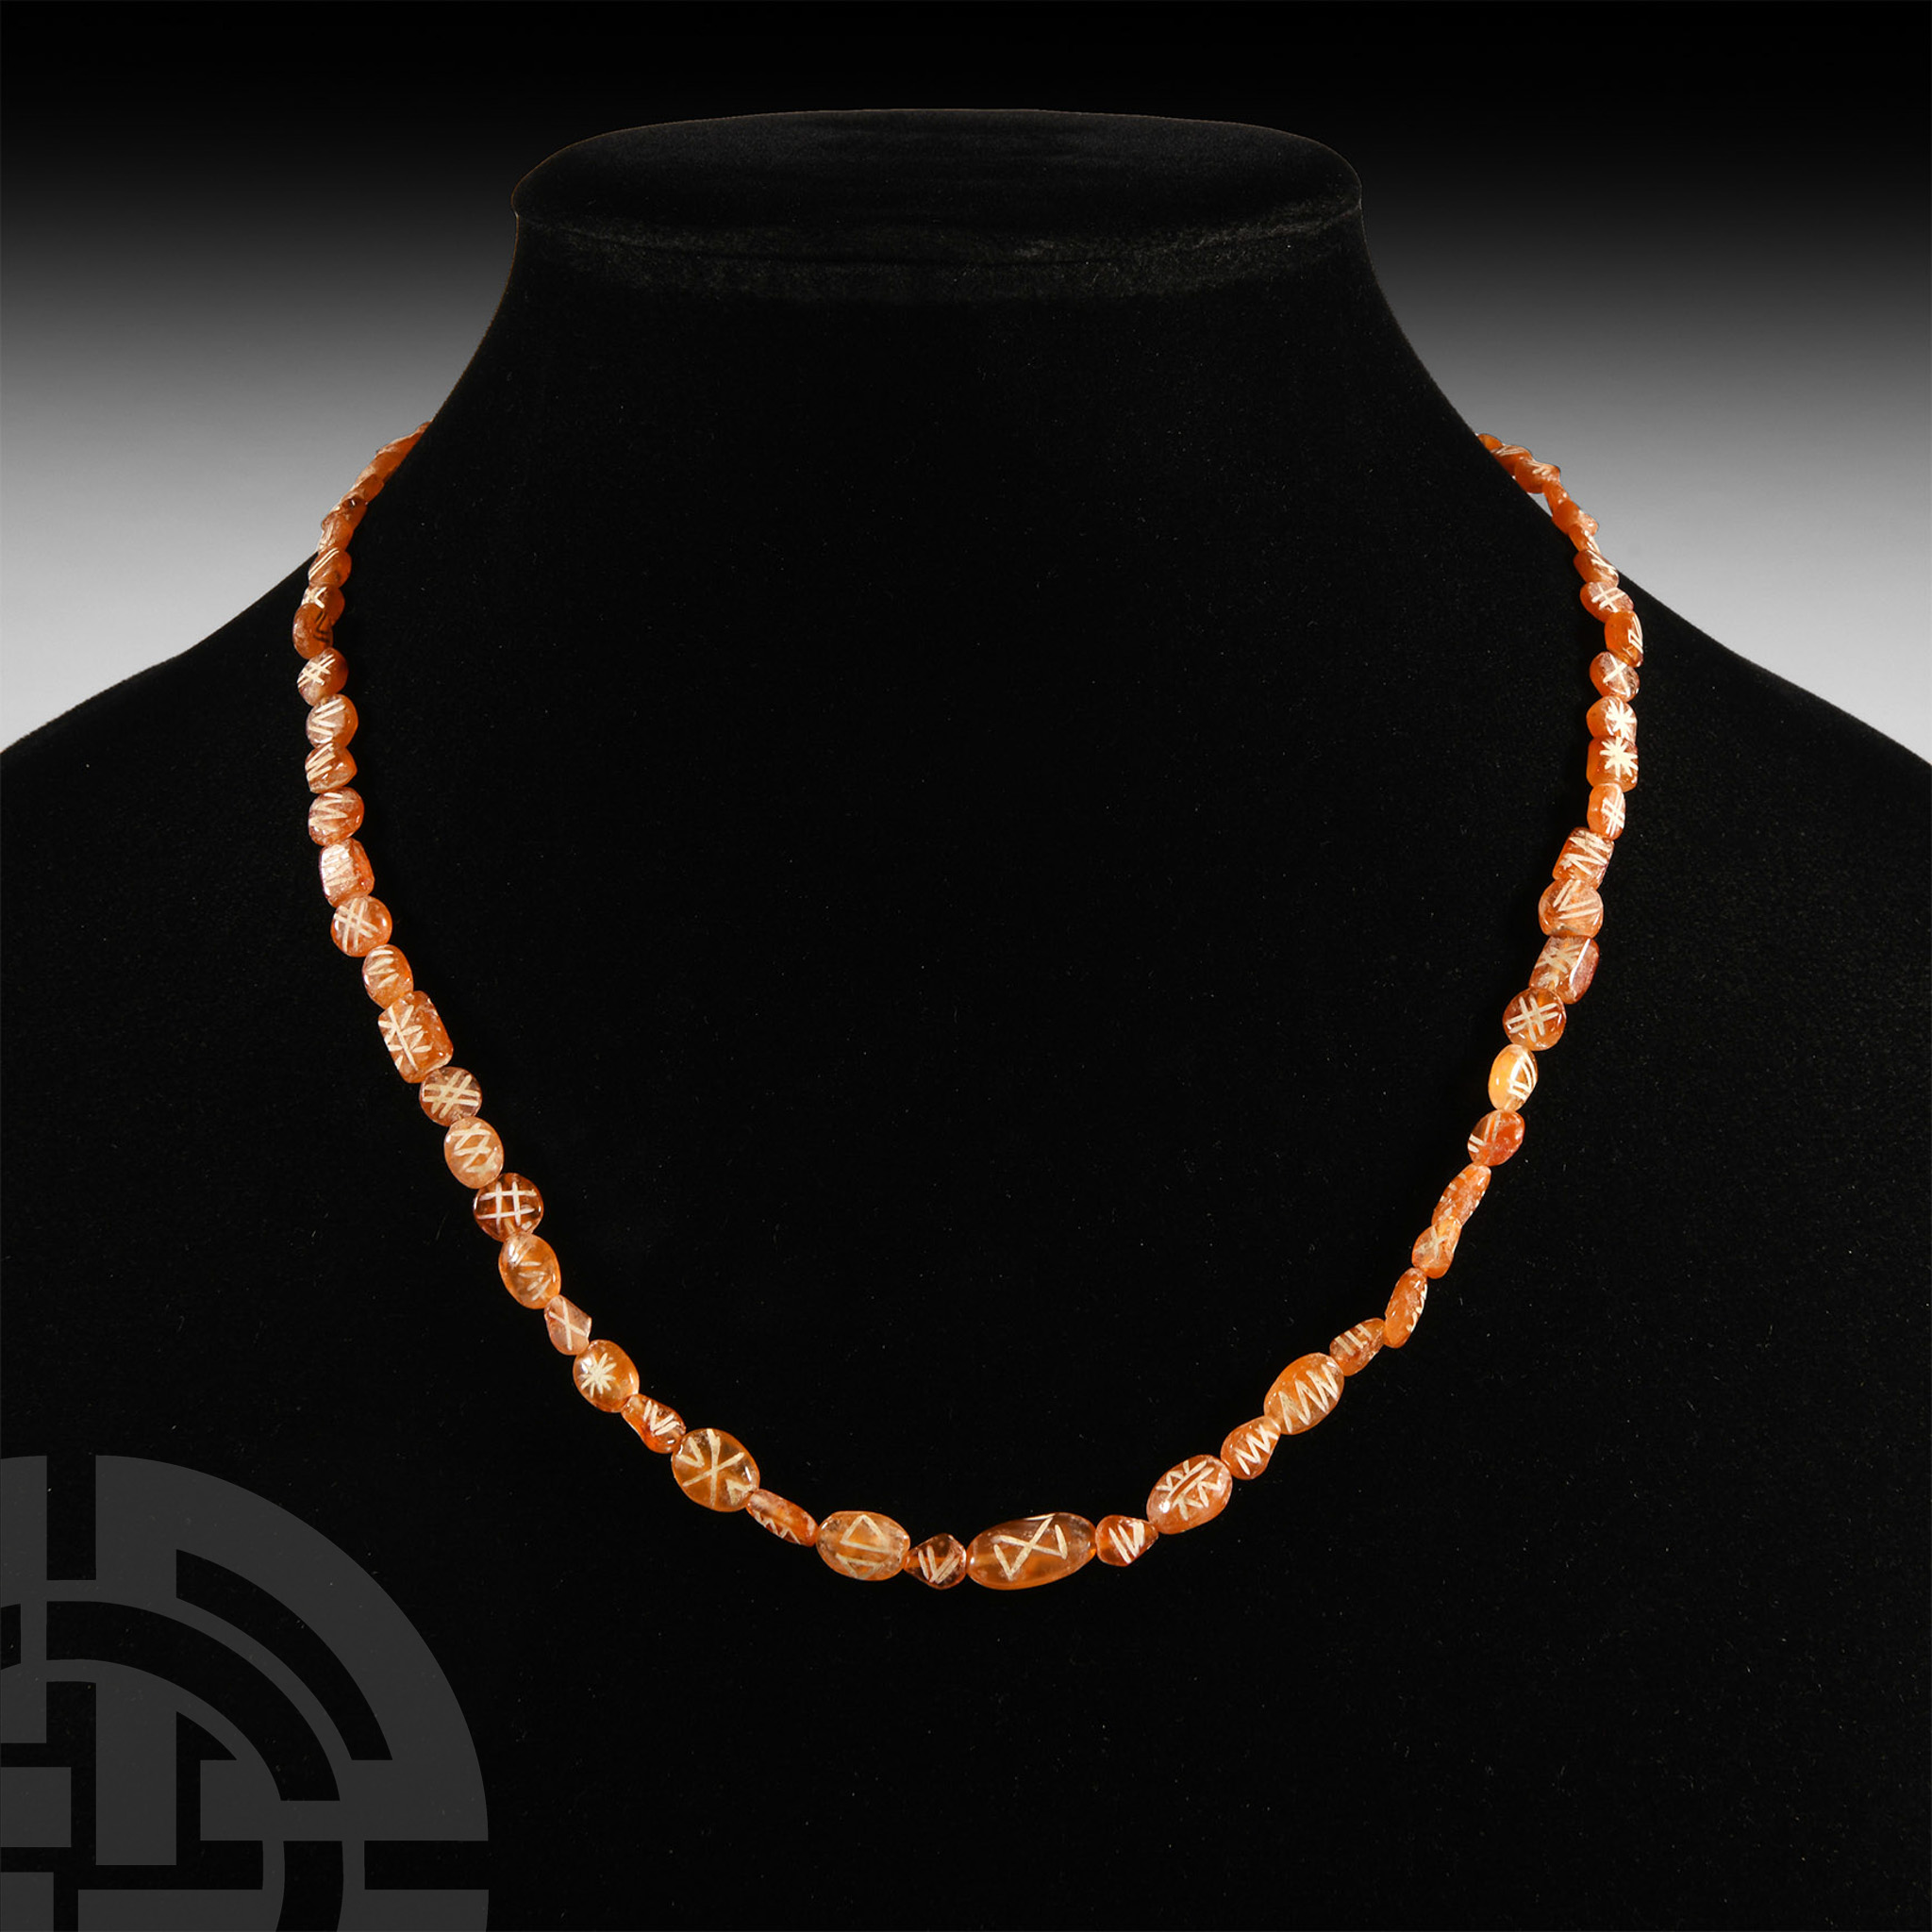 Indus Valley Etched Orange Carnelian Bead Necklace String